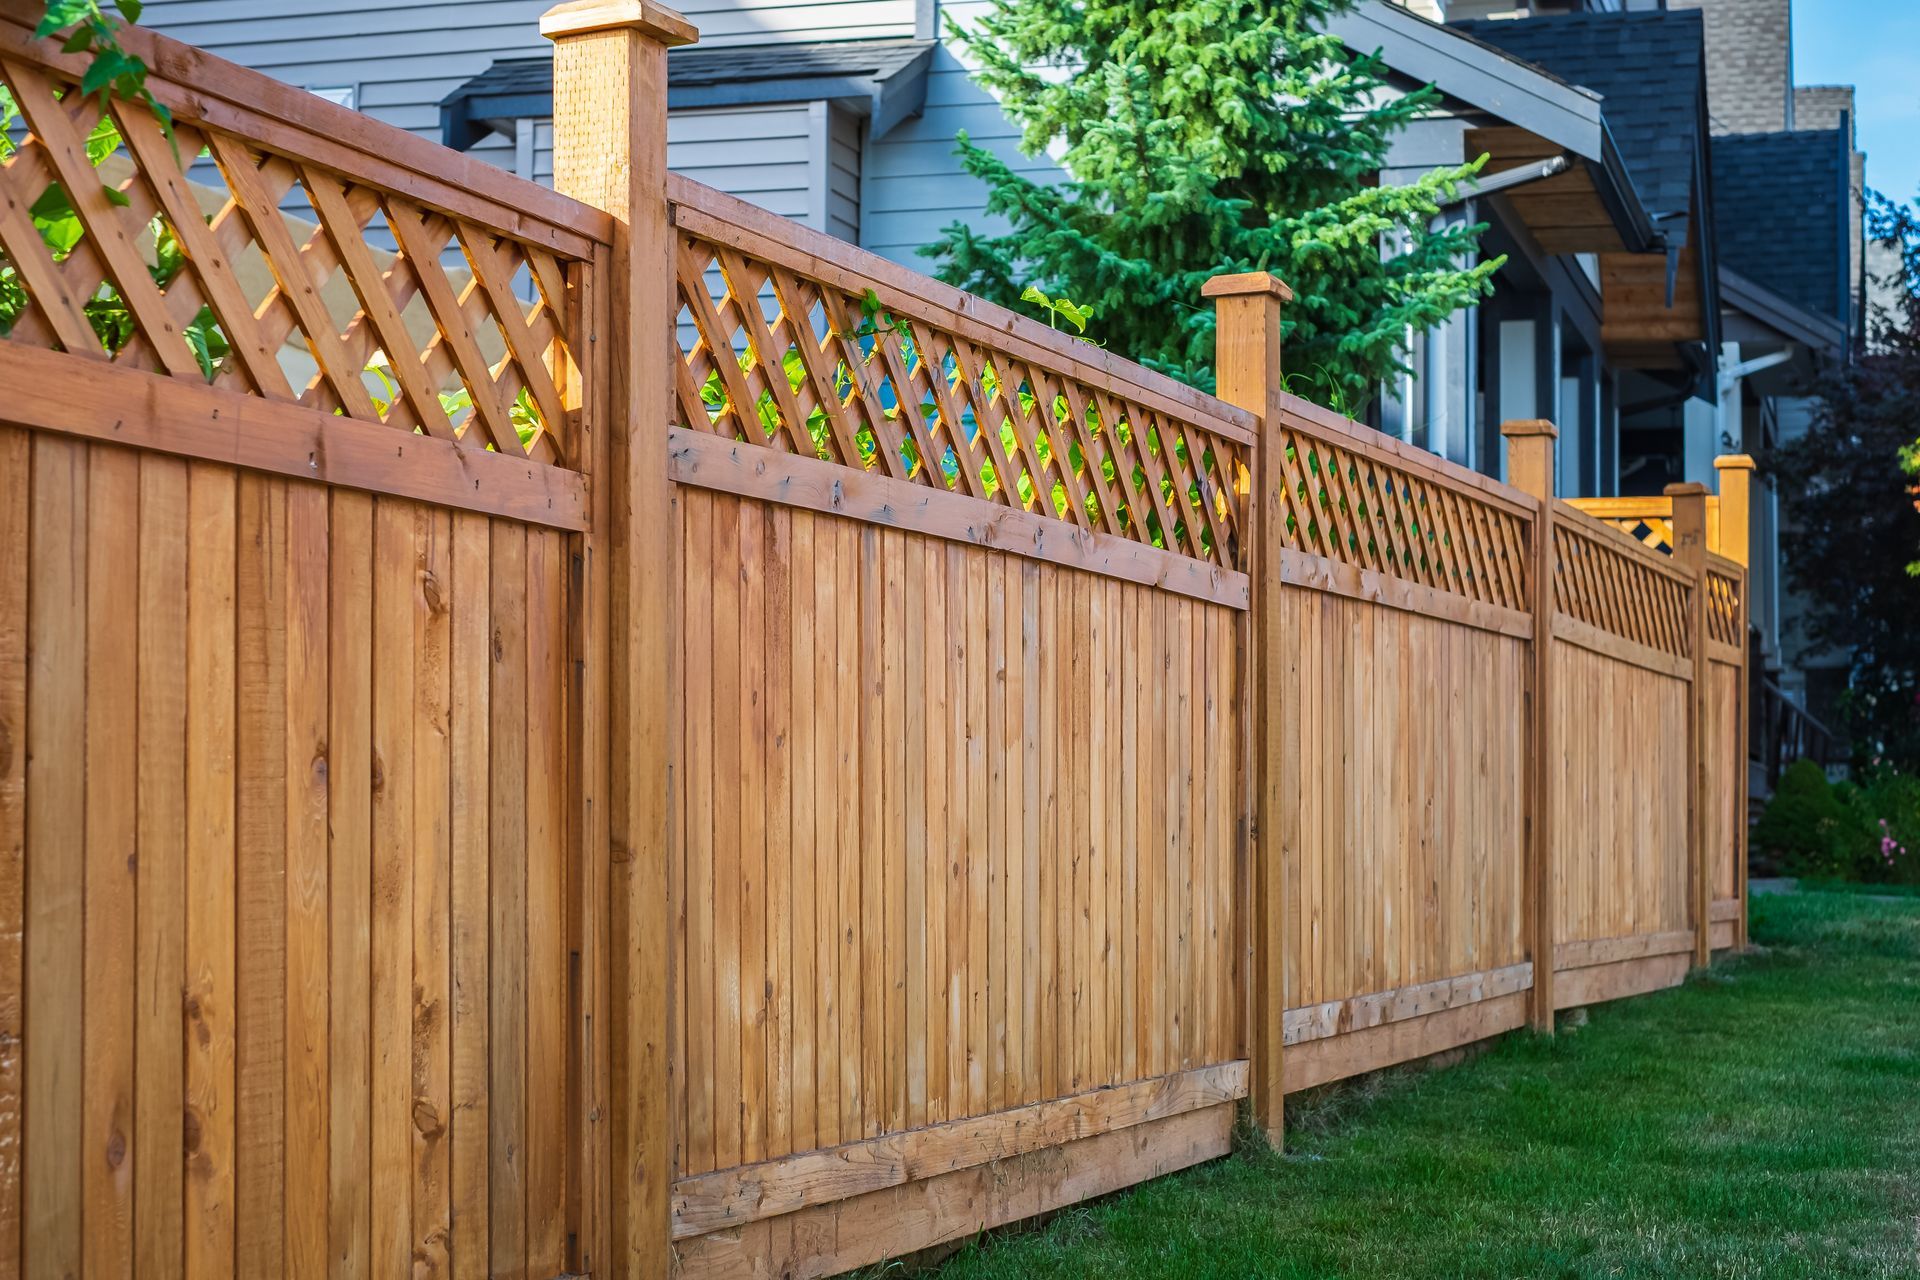 Things to Look for Shopping for a New Fence